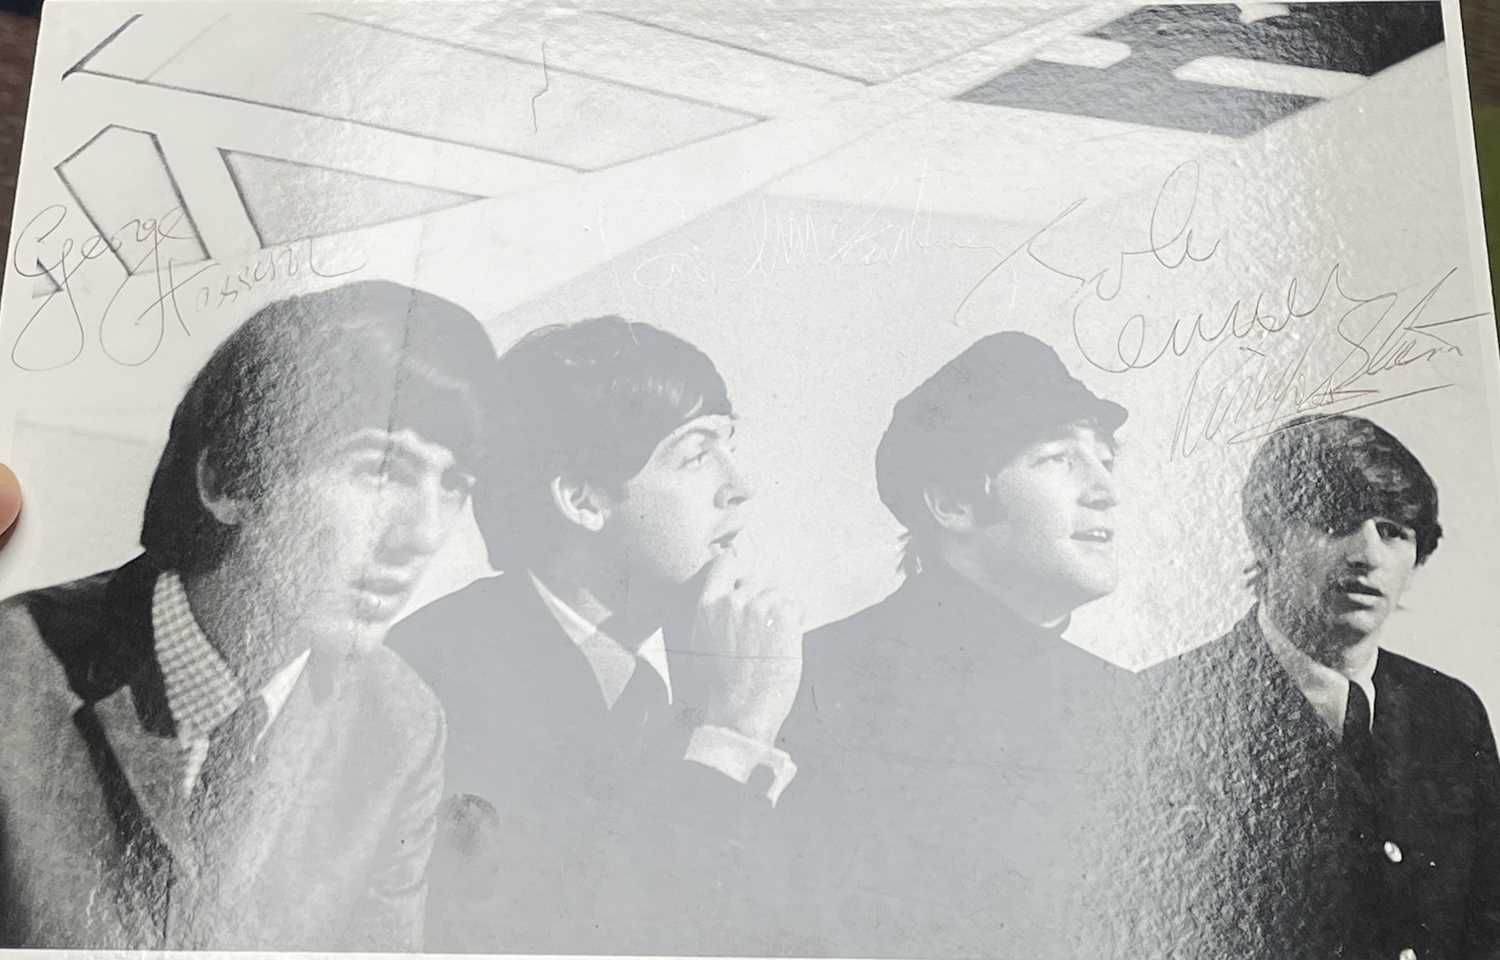 THE BEATLES FULLY SIGNED PHOTOGRAPH. - Image 7 of 8